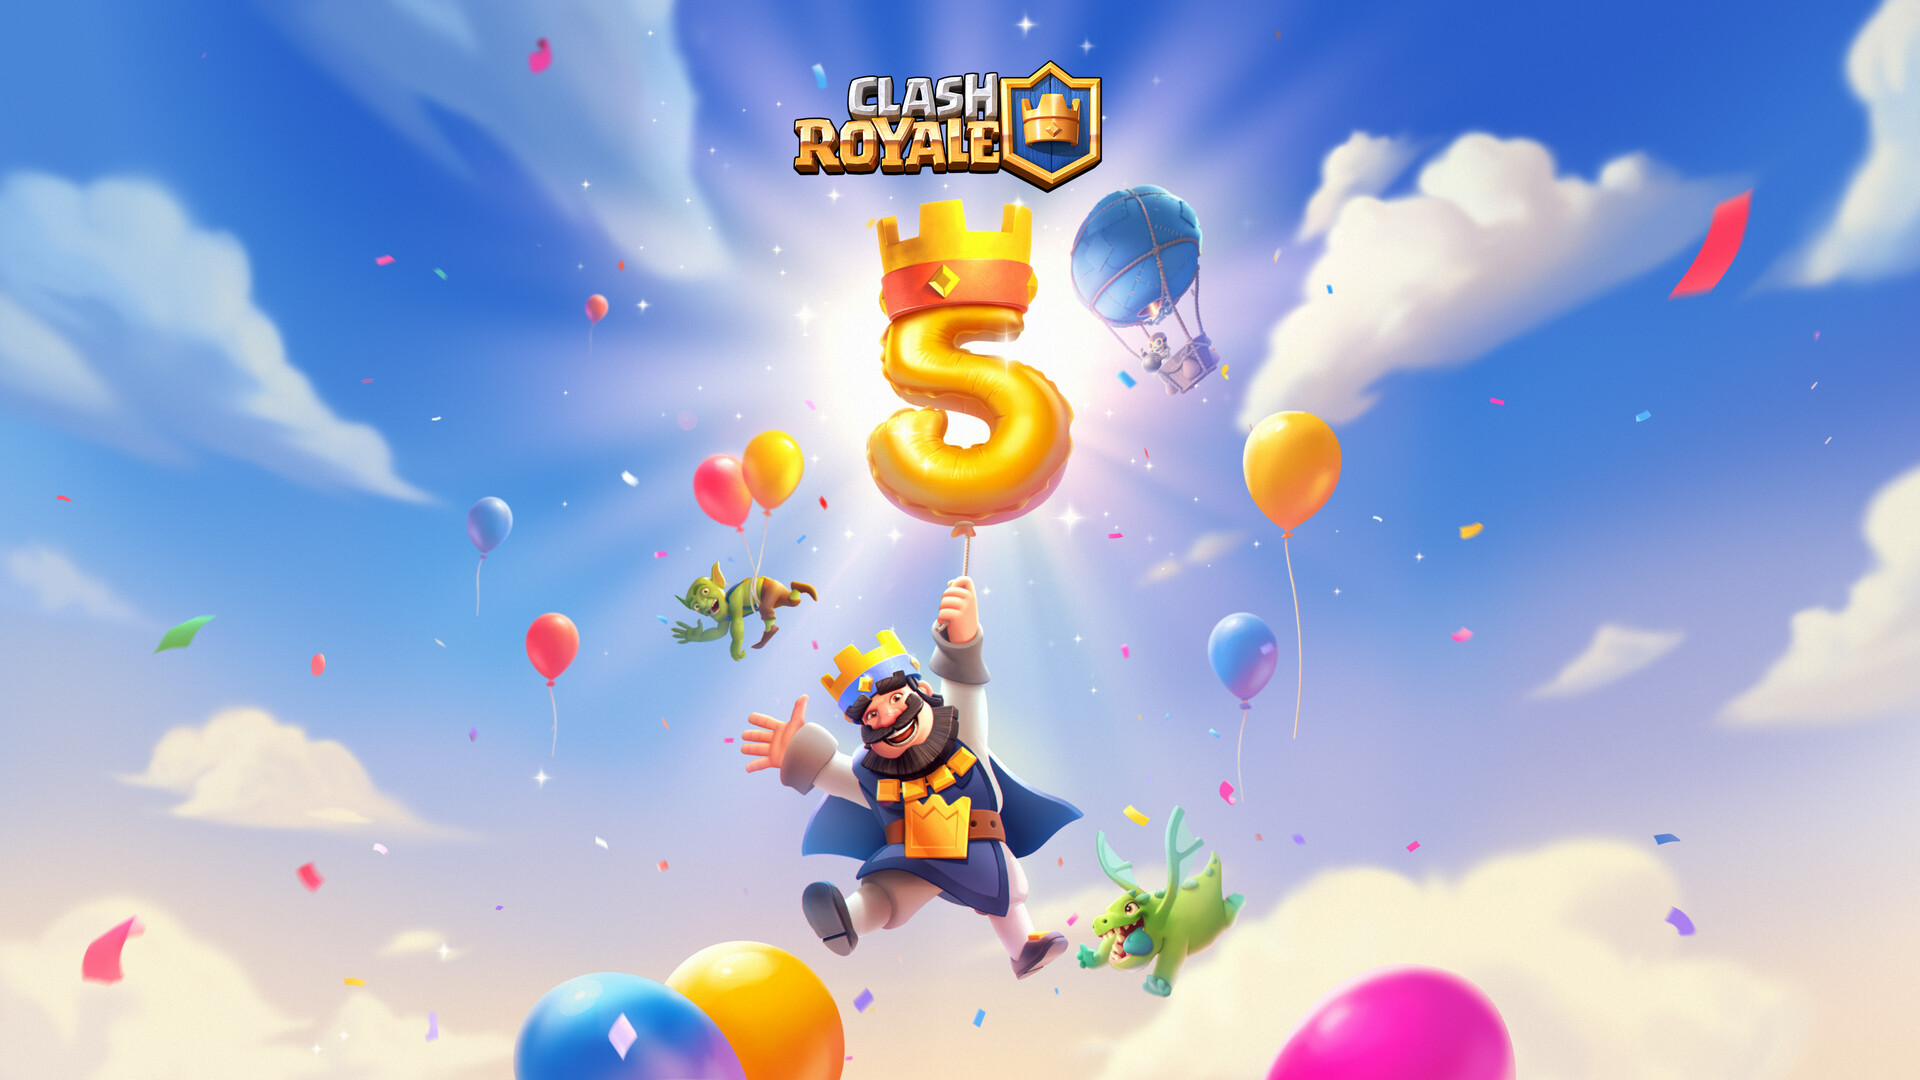 ArtStation - Background color Clash Royale - Loading Screen - 5 Years  Birthday